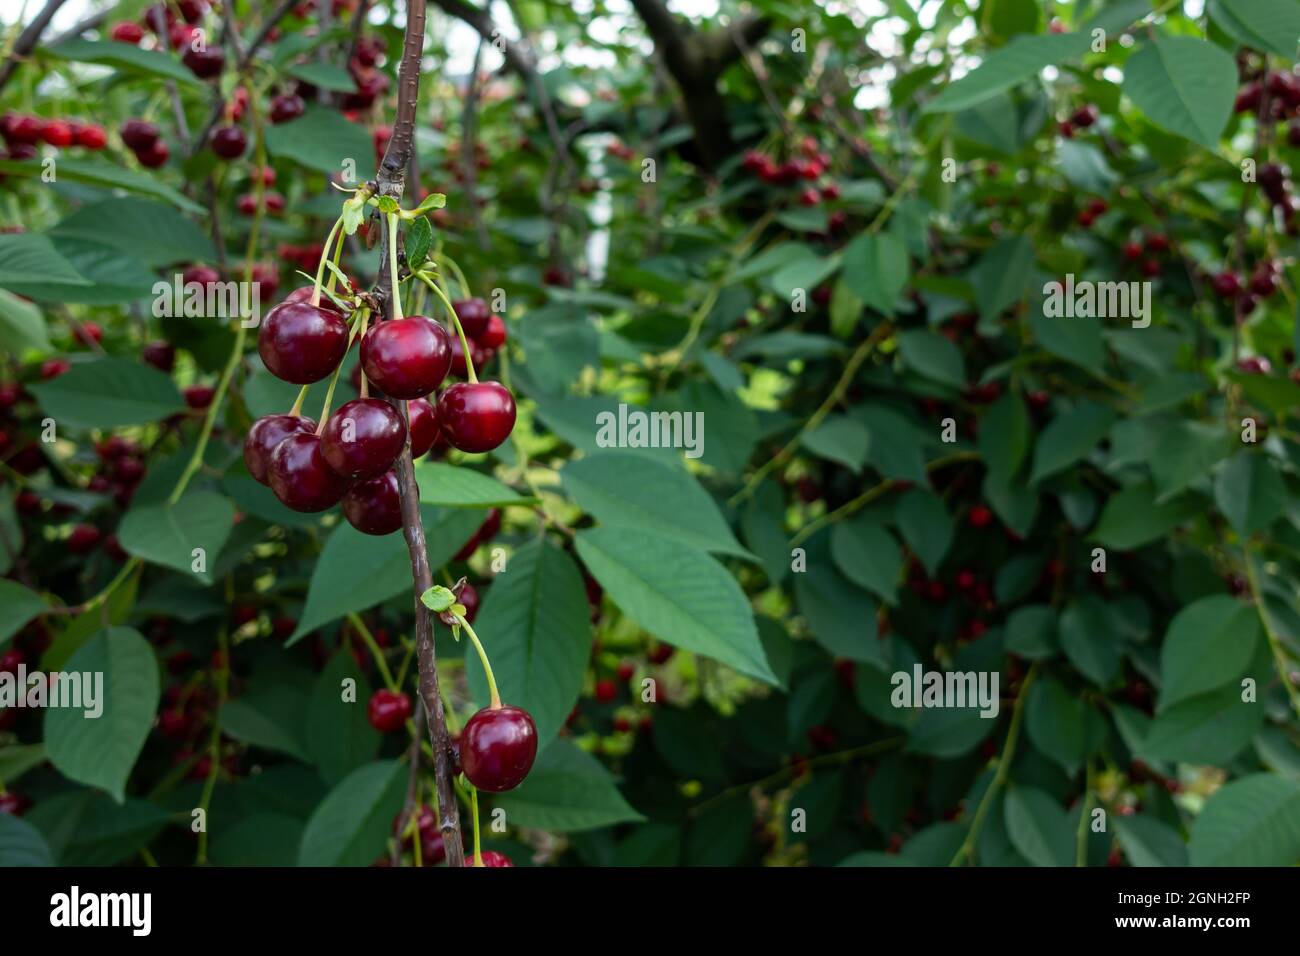 Cherry tree branches bending under the weight of the fruit. Made under good lighting conditions. Stock Photo